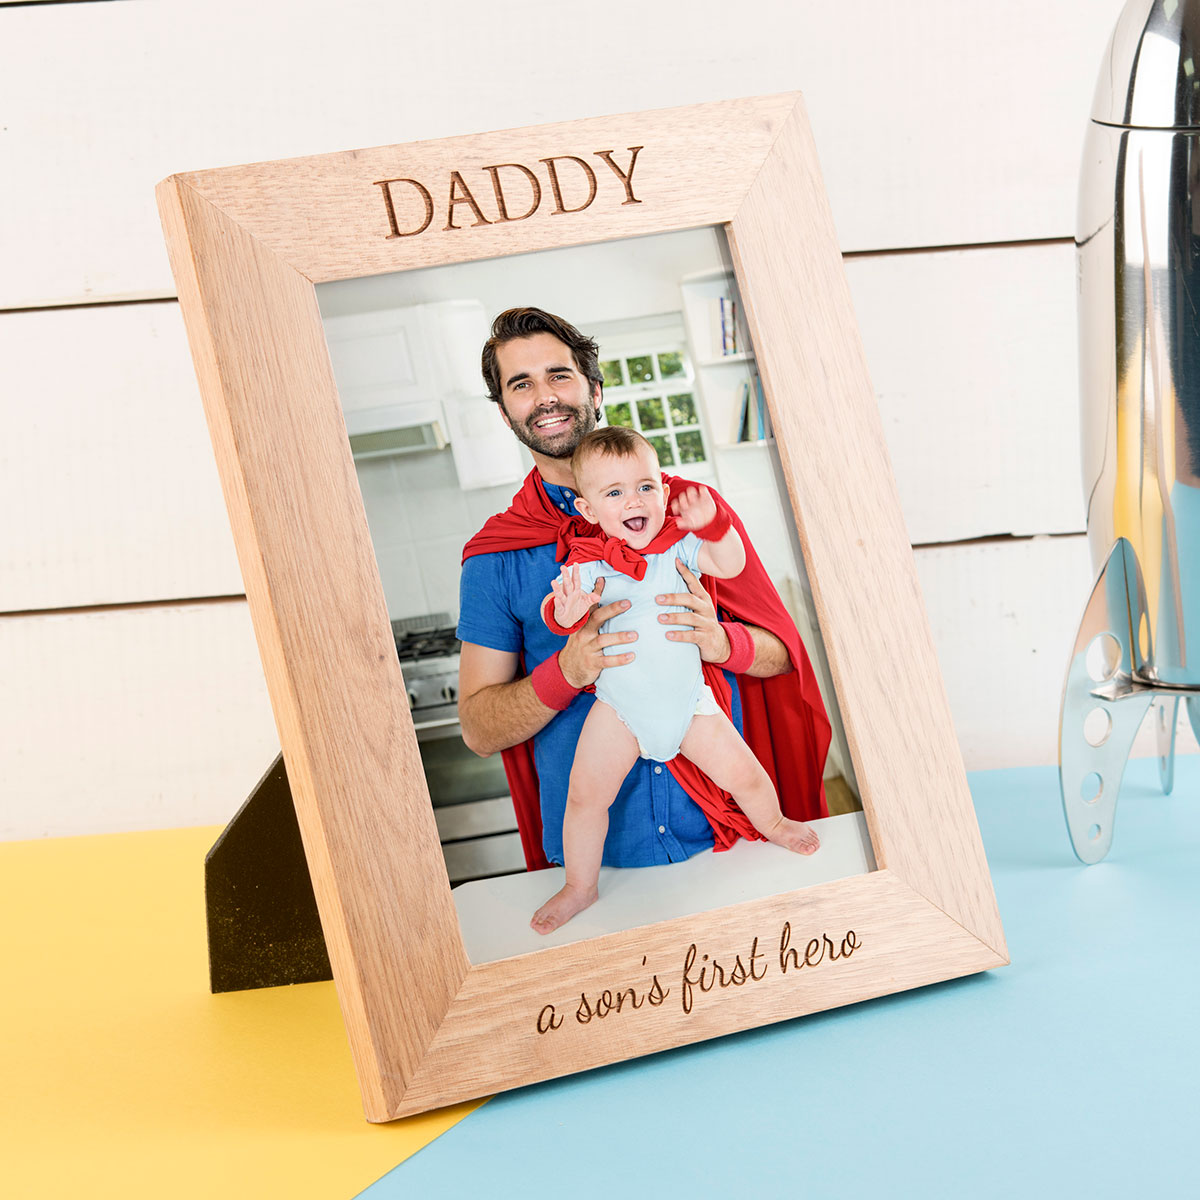 Personalised Wooden Photo Frame - A Son's First Hero